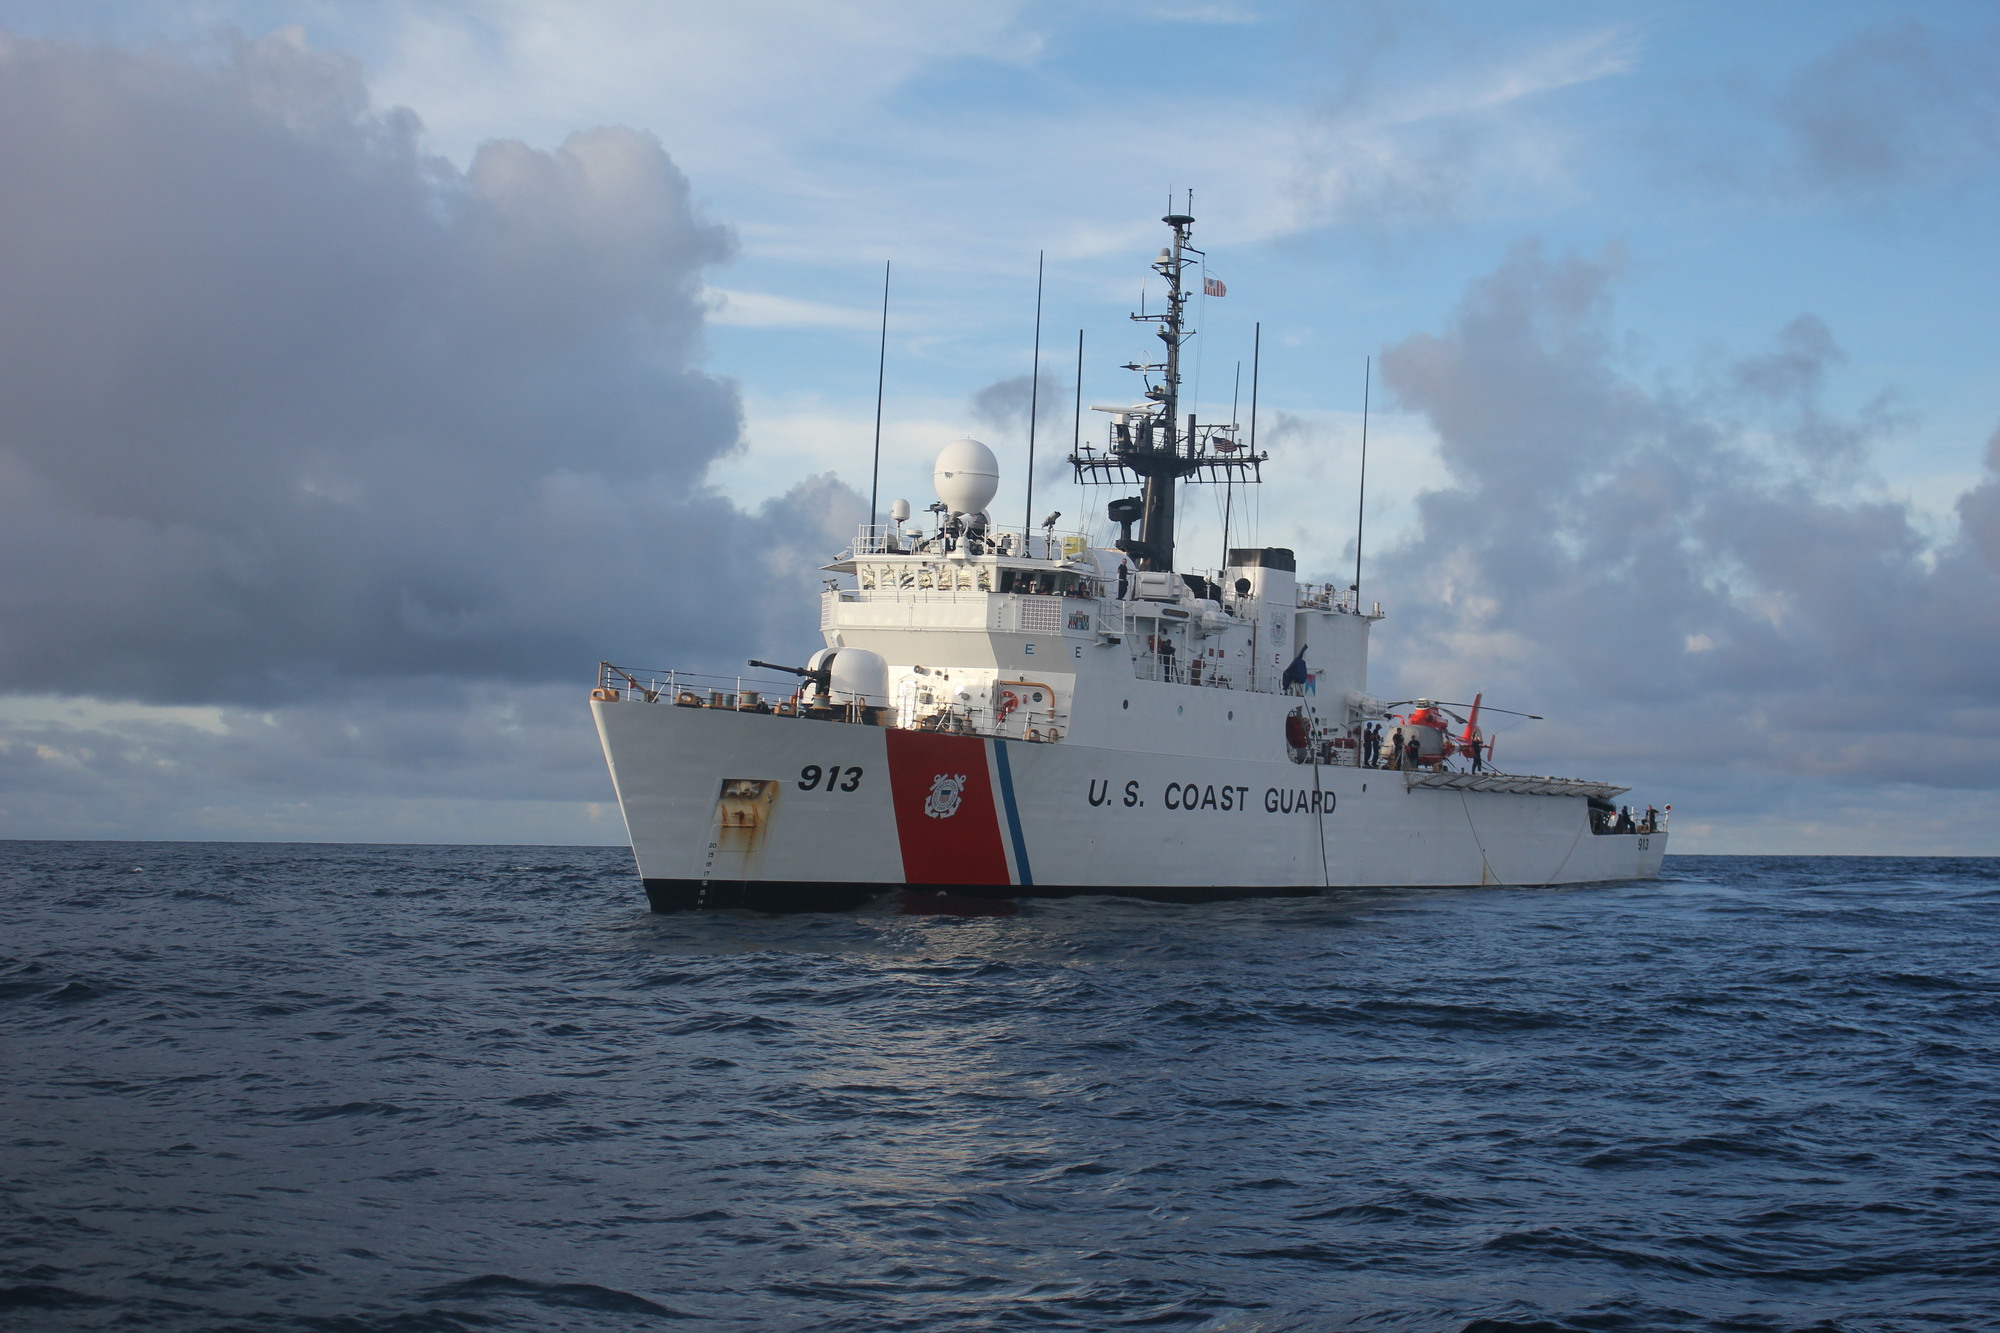 Coast Guard Cutter Mohawk returns after 90-day Eastern Pacific patrol